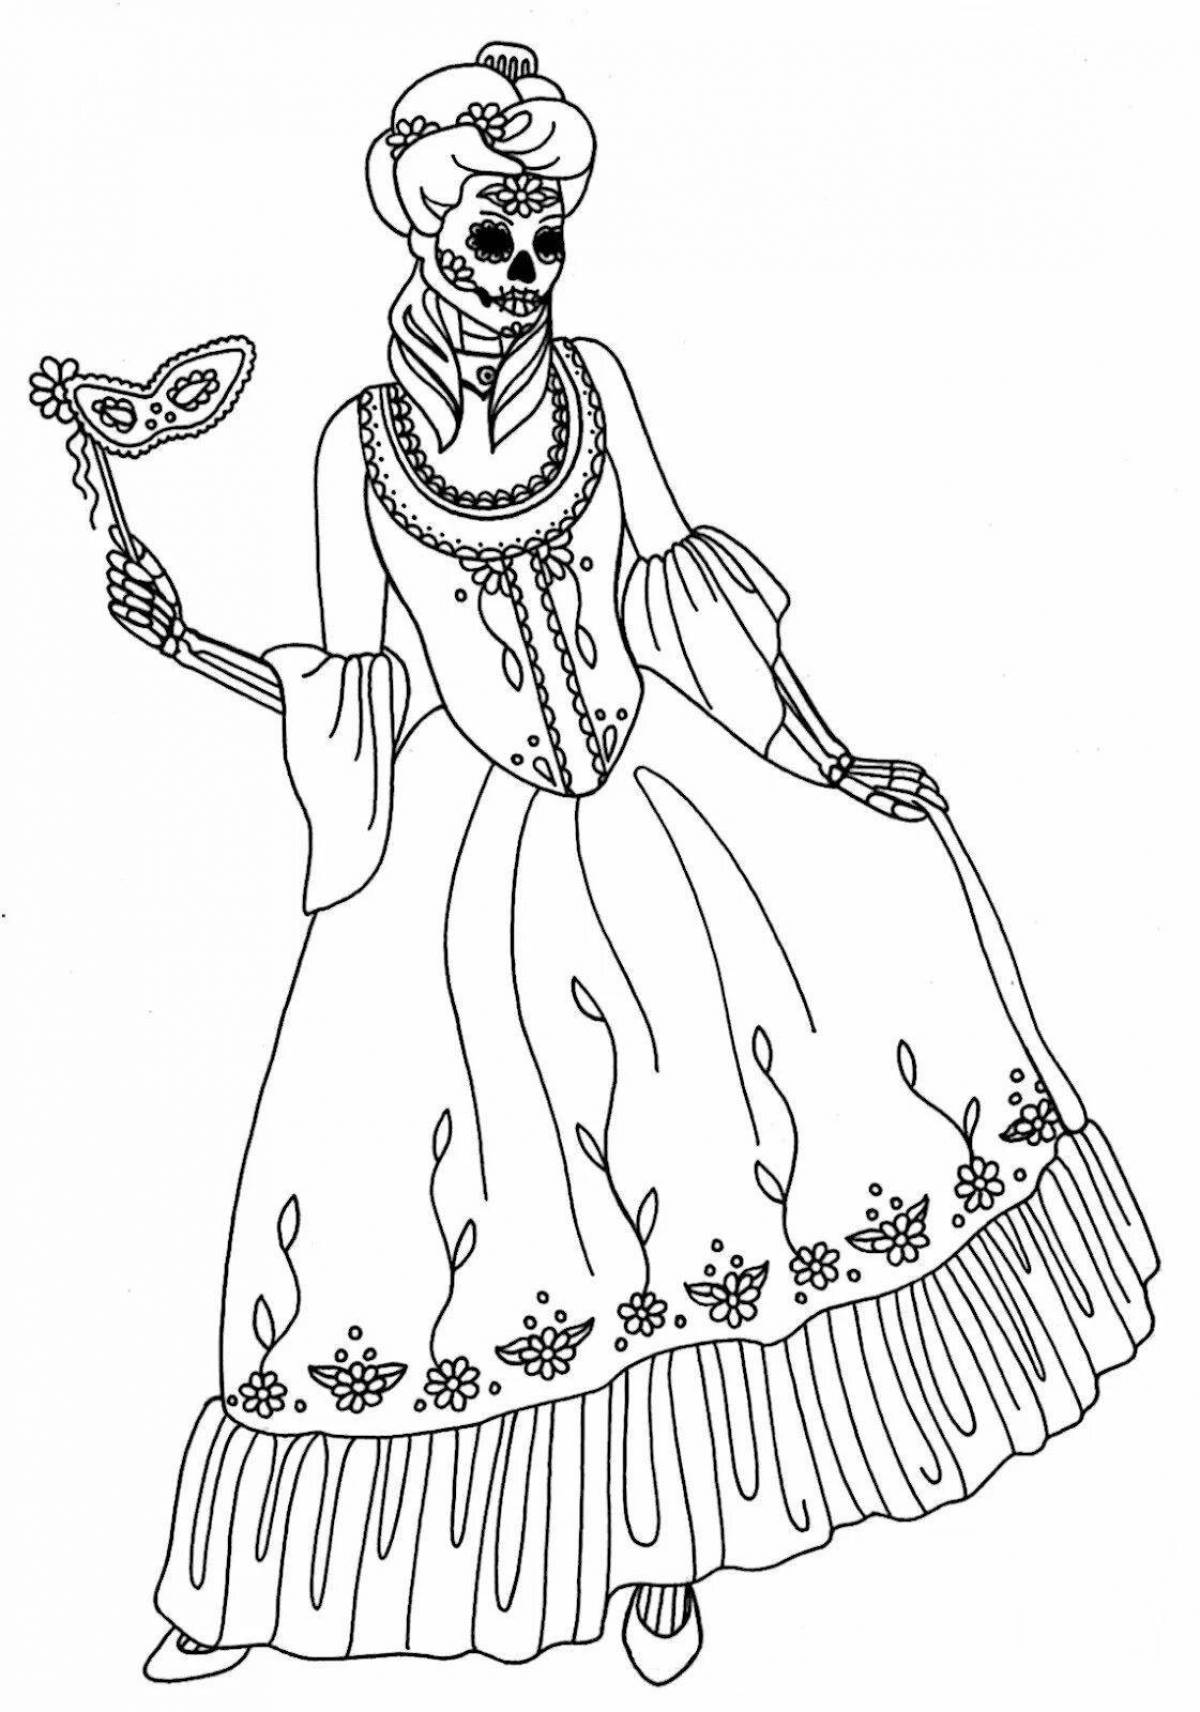 Coloring page elegant carnival costume